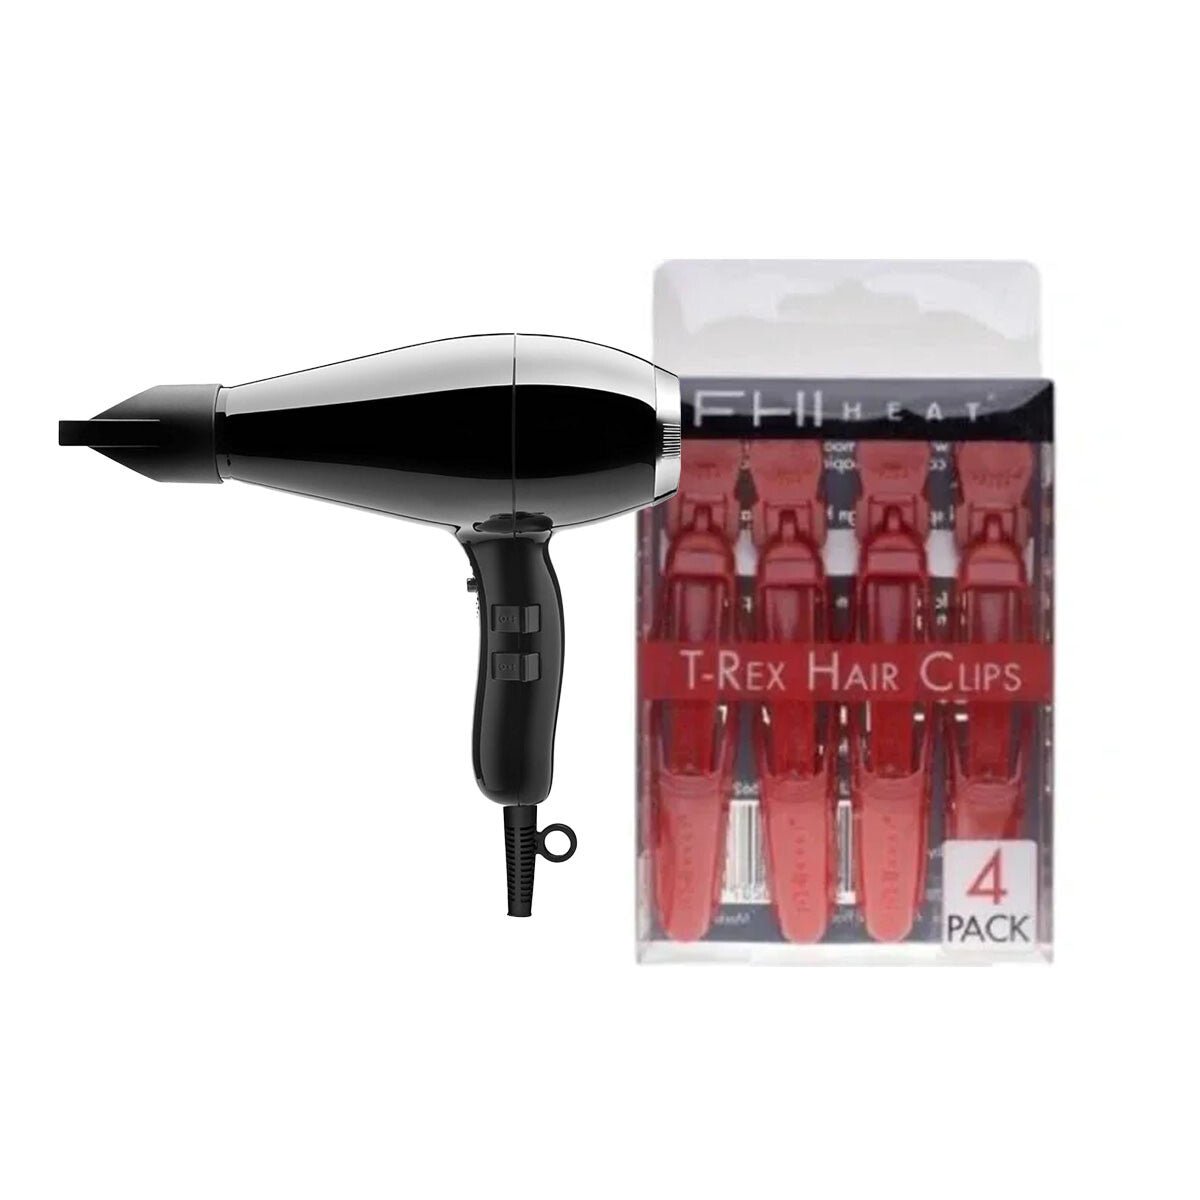 Hair Styling Power Duo: Elchim Milano Hair Dryer and FHI Heat T-Rex Clips Set - SkincareEssentials